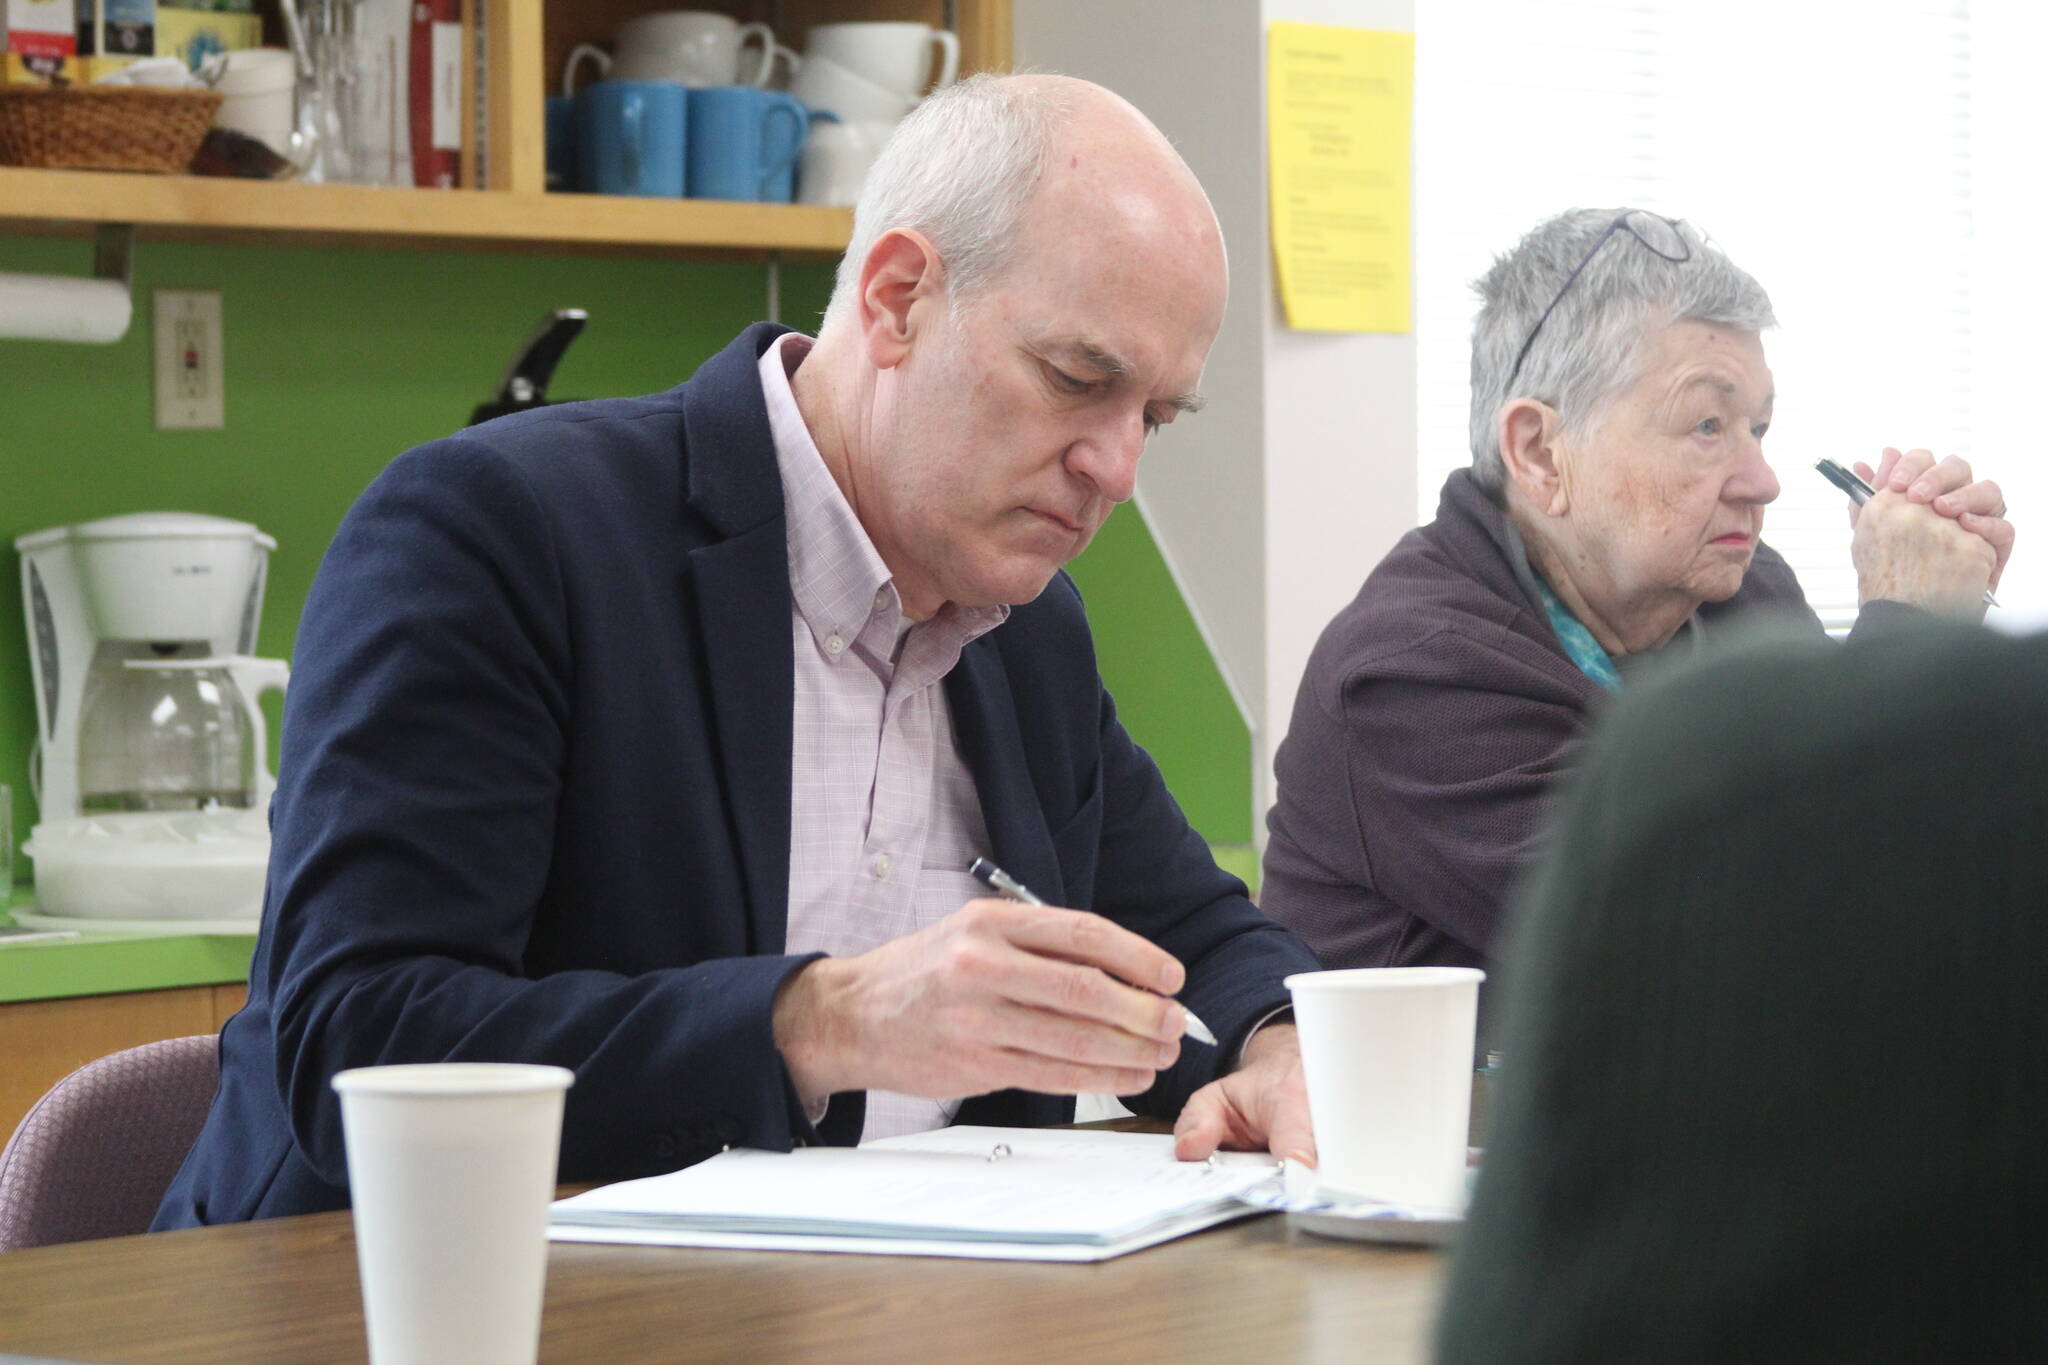 U.S. Rep. Rick Larsen visited St. Stephen’s Episcopal Church Wednesday to meet with volunteers from SPiN Cafe and Whidbey Island CARE. (Photo by Karina Andrew/Whidbey News-Times)